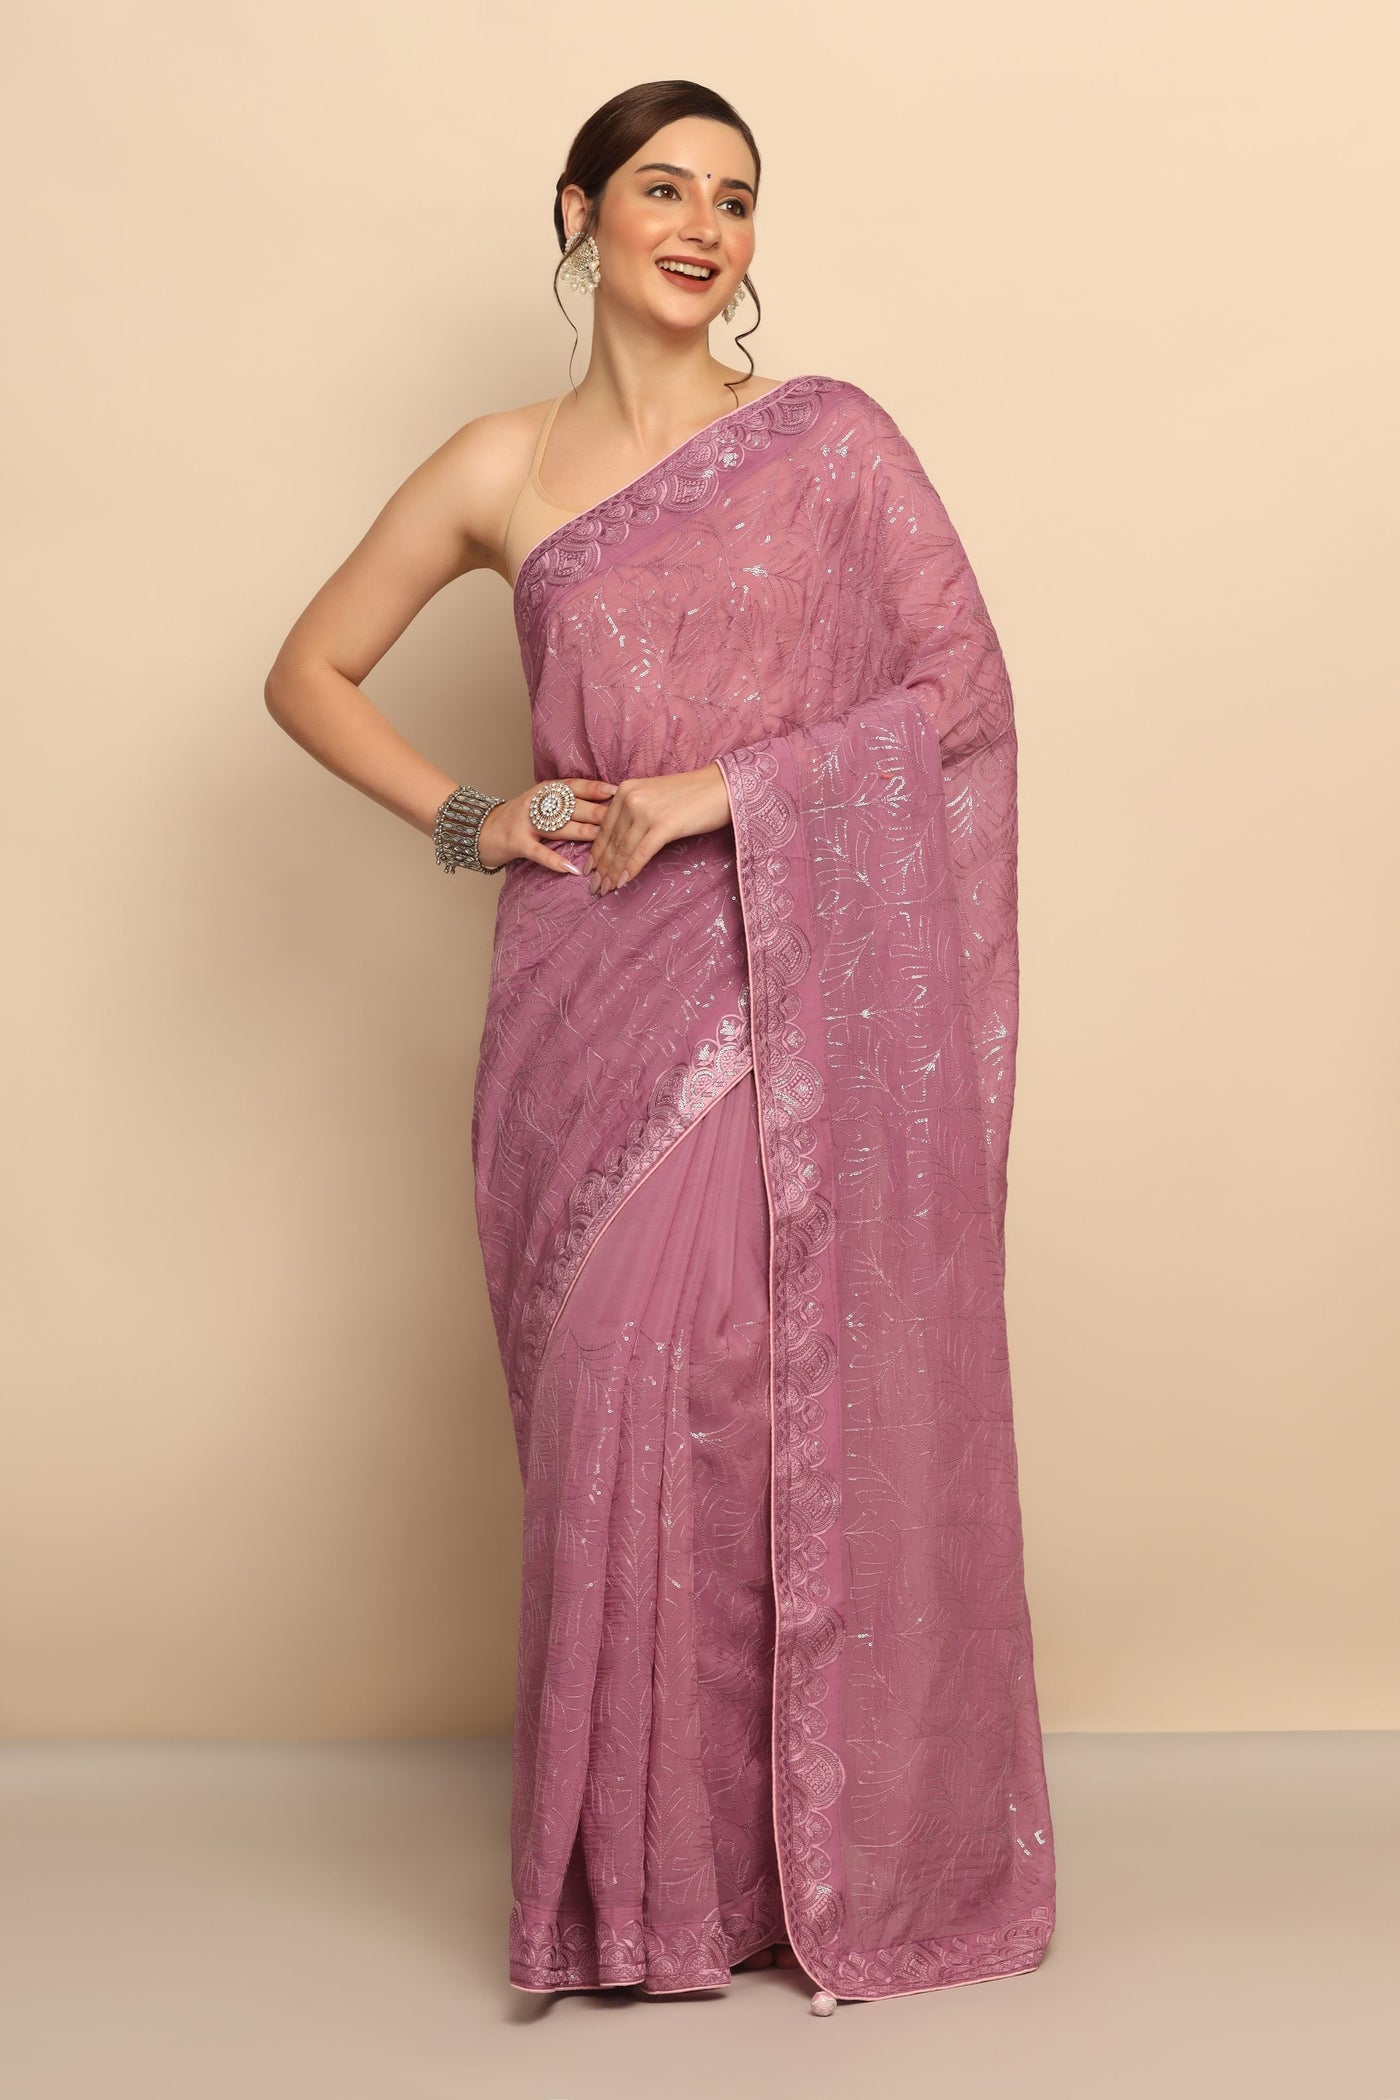 Enchanting Lavender Color Saree with Sequins & Thread Work